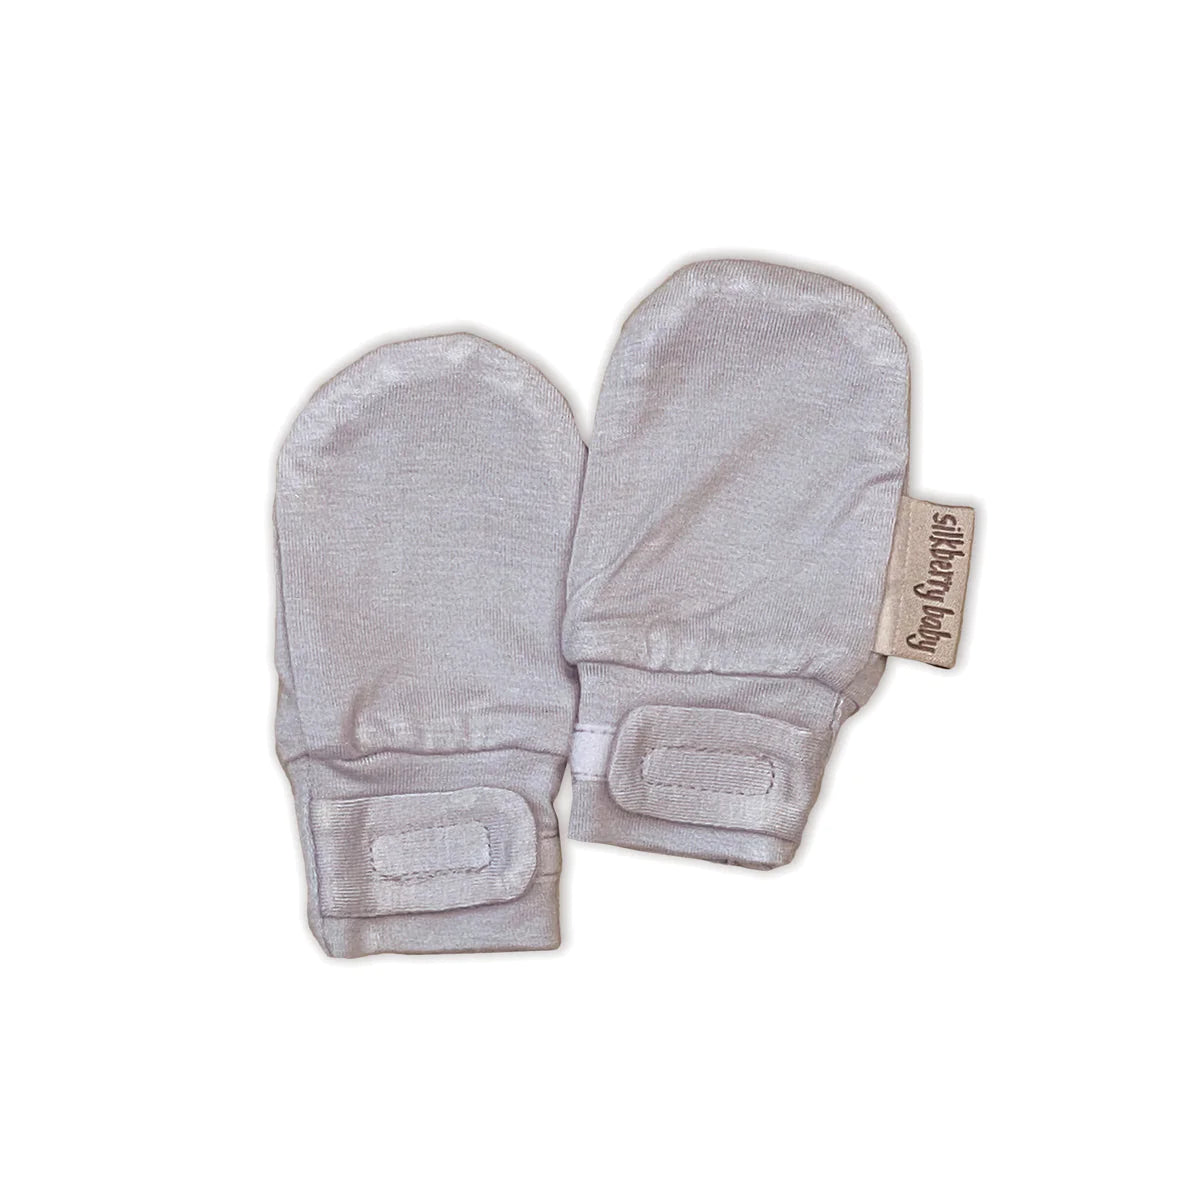 Silkberry Bamboo Stay-On No Scratch Mittens